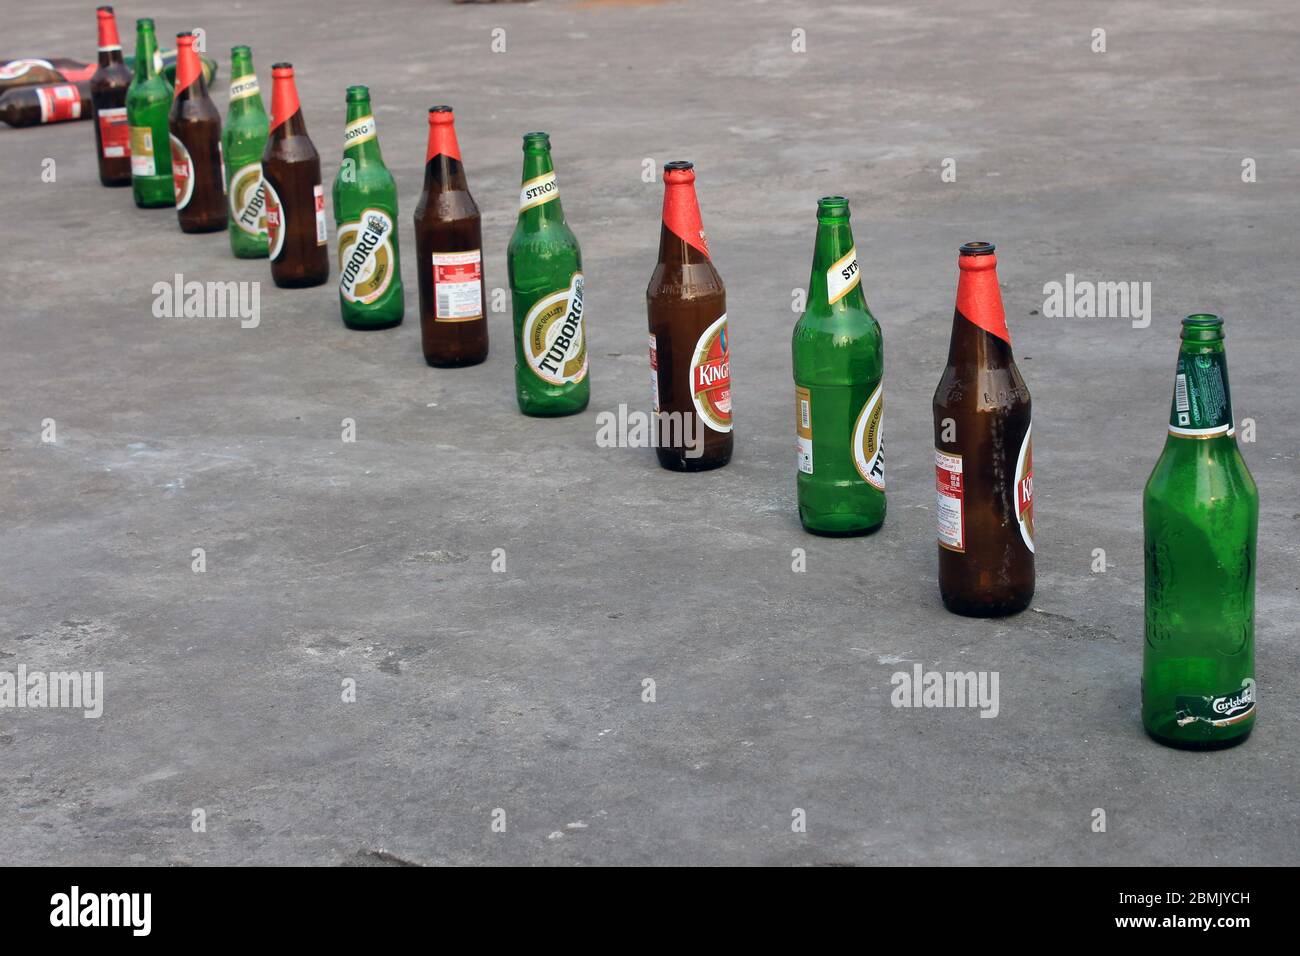 Kolkata, West Bengal on 16th March in 2016 : Empty beer bottle in a row on the floor. Concept of social distancing issue. Stock Photo